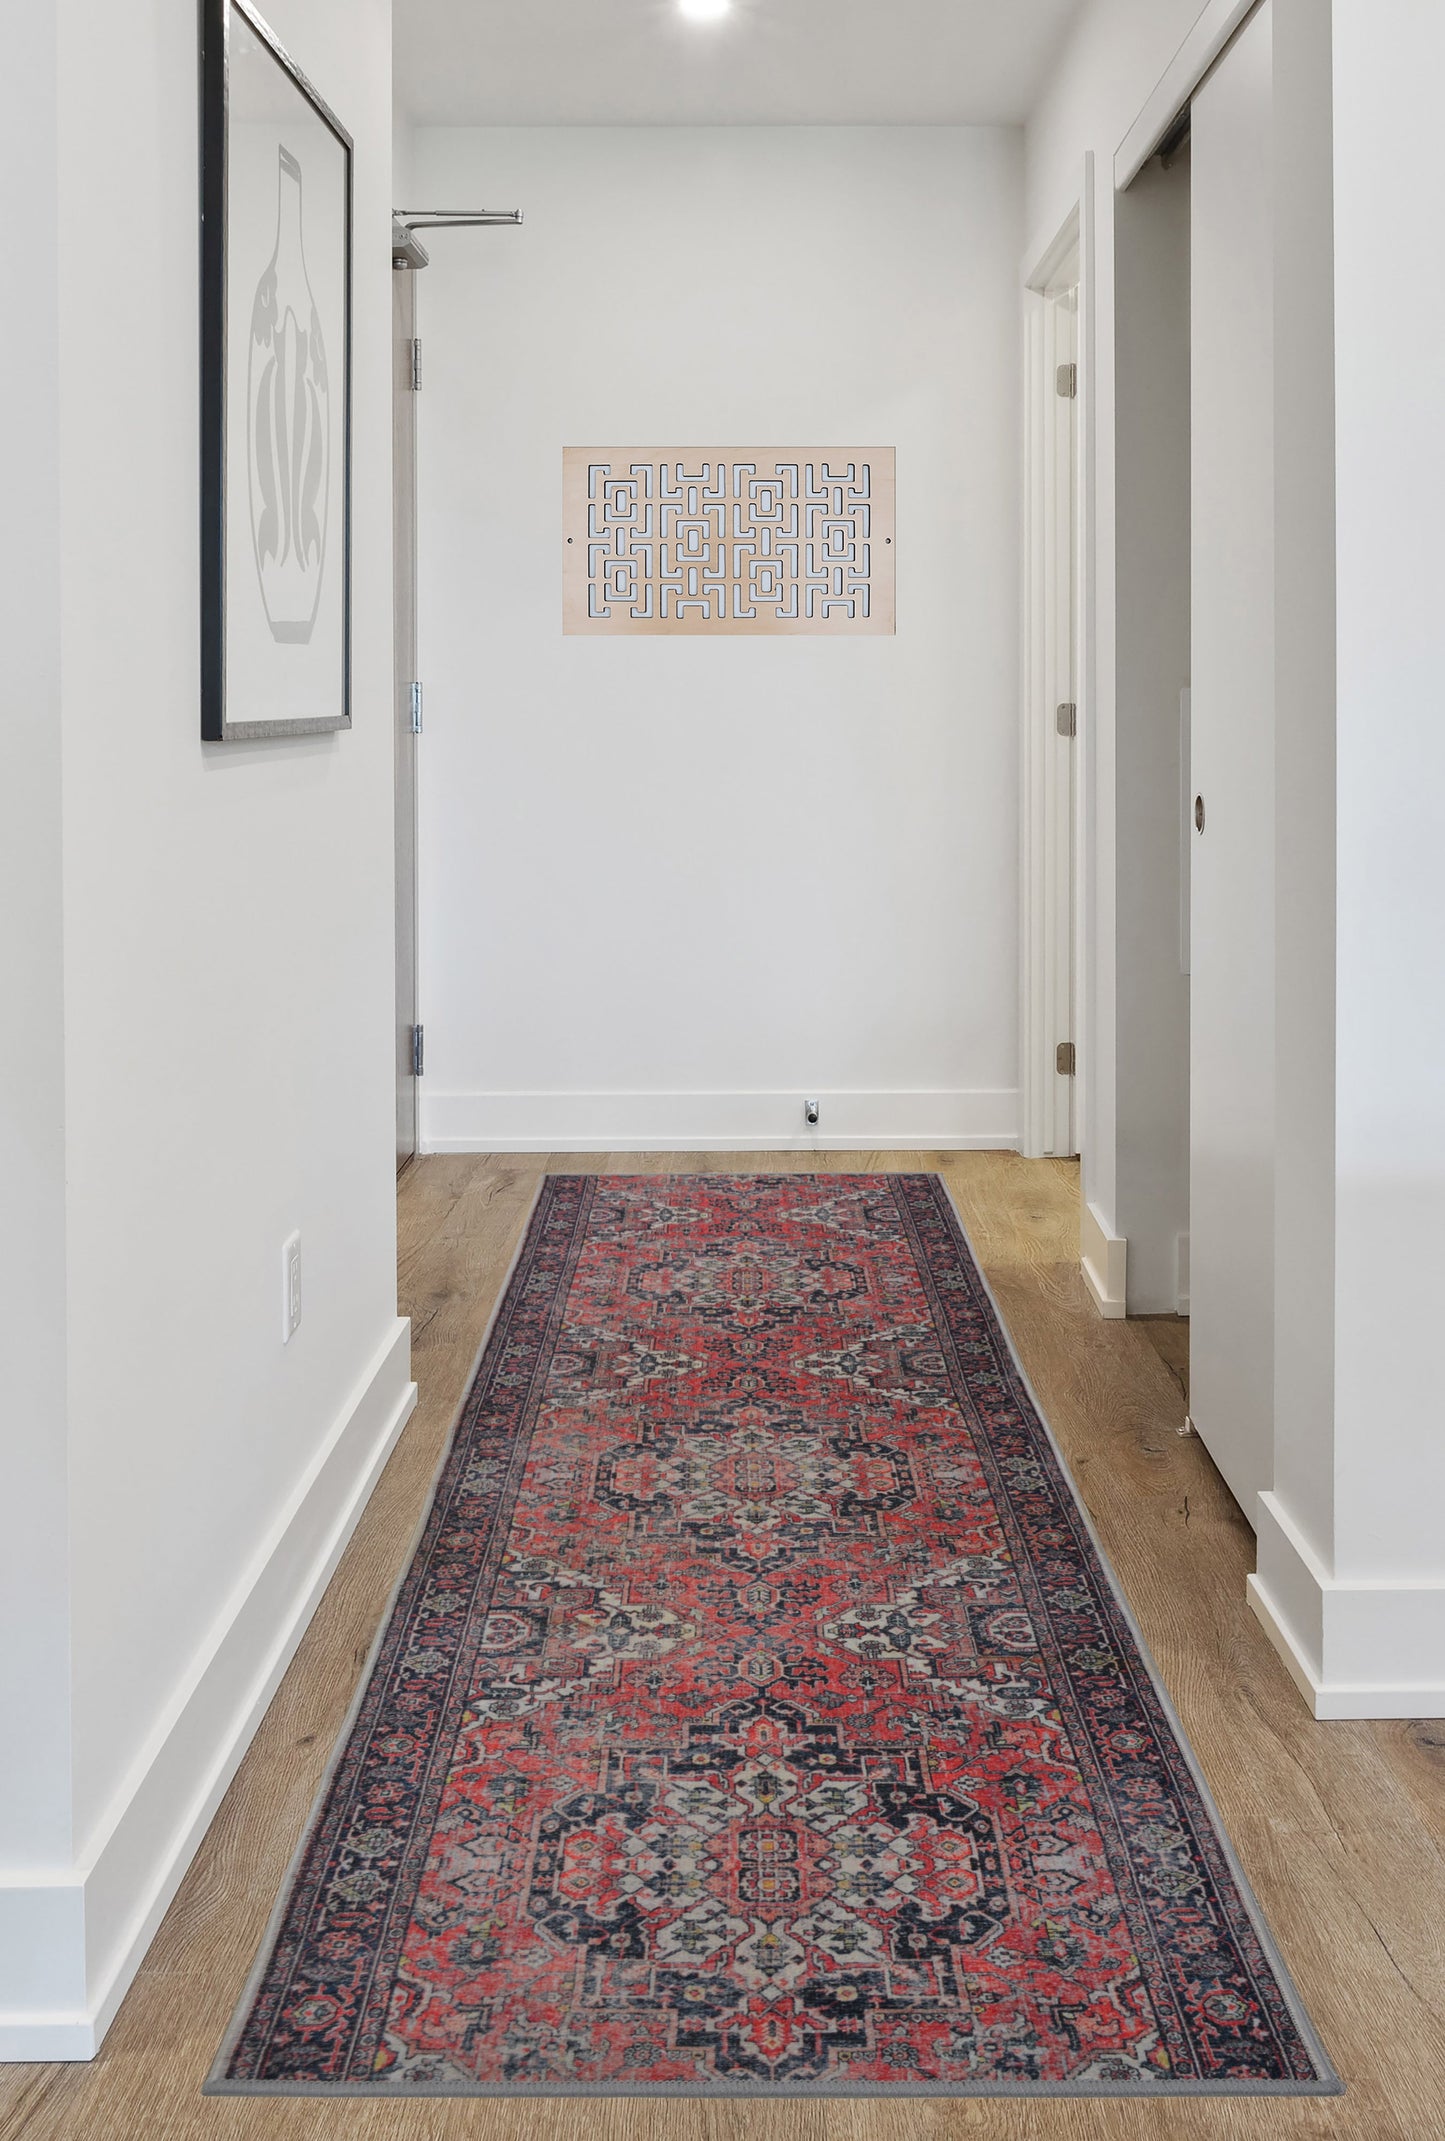 Image Home Collection Custom Size Runner Rug Kilim Medallion Design Terracotta-MultiColor Skid Resistant Cut To Size Rug Runners Customize By Feet and 25 in Width